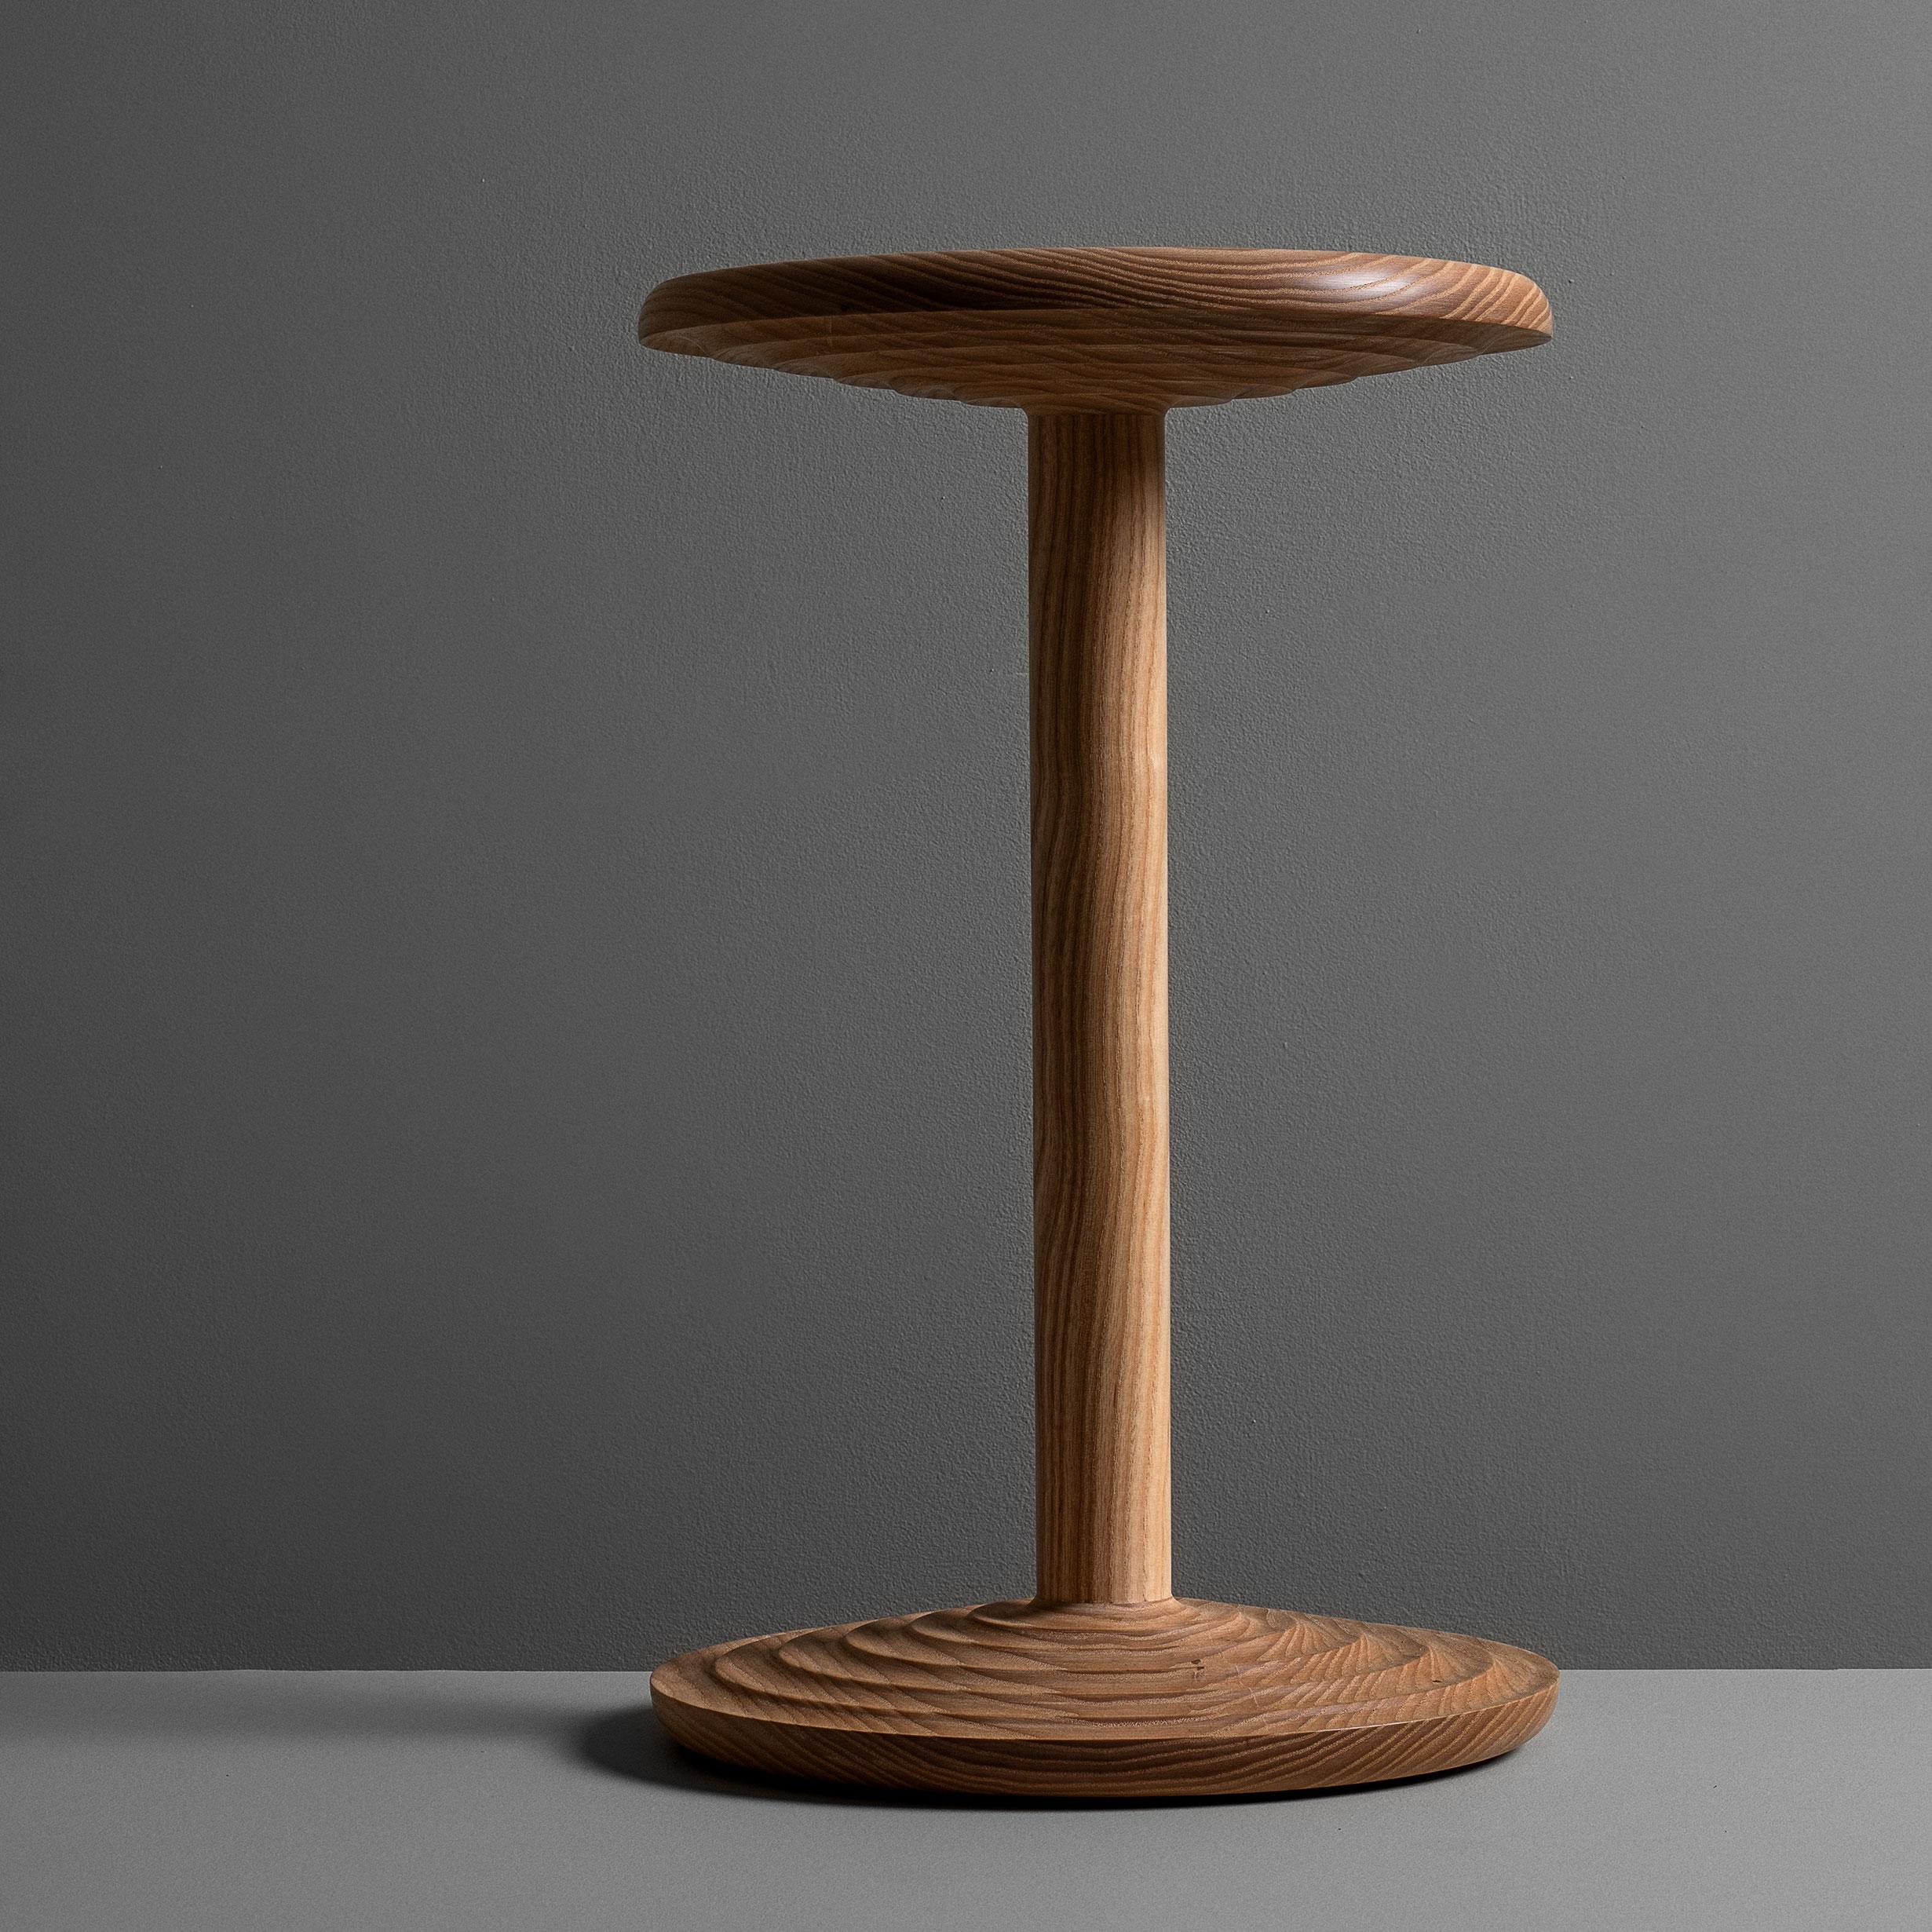 Beautifully hand-turned and handcrafted white ash rippled side table in the modernist design. Perfect in form and scale. This is a bespoke piece of fine quality, handmade by a master-craftsman in solid English Ash.

We design bold and distinctive